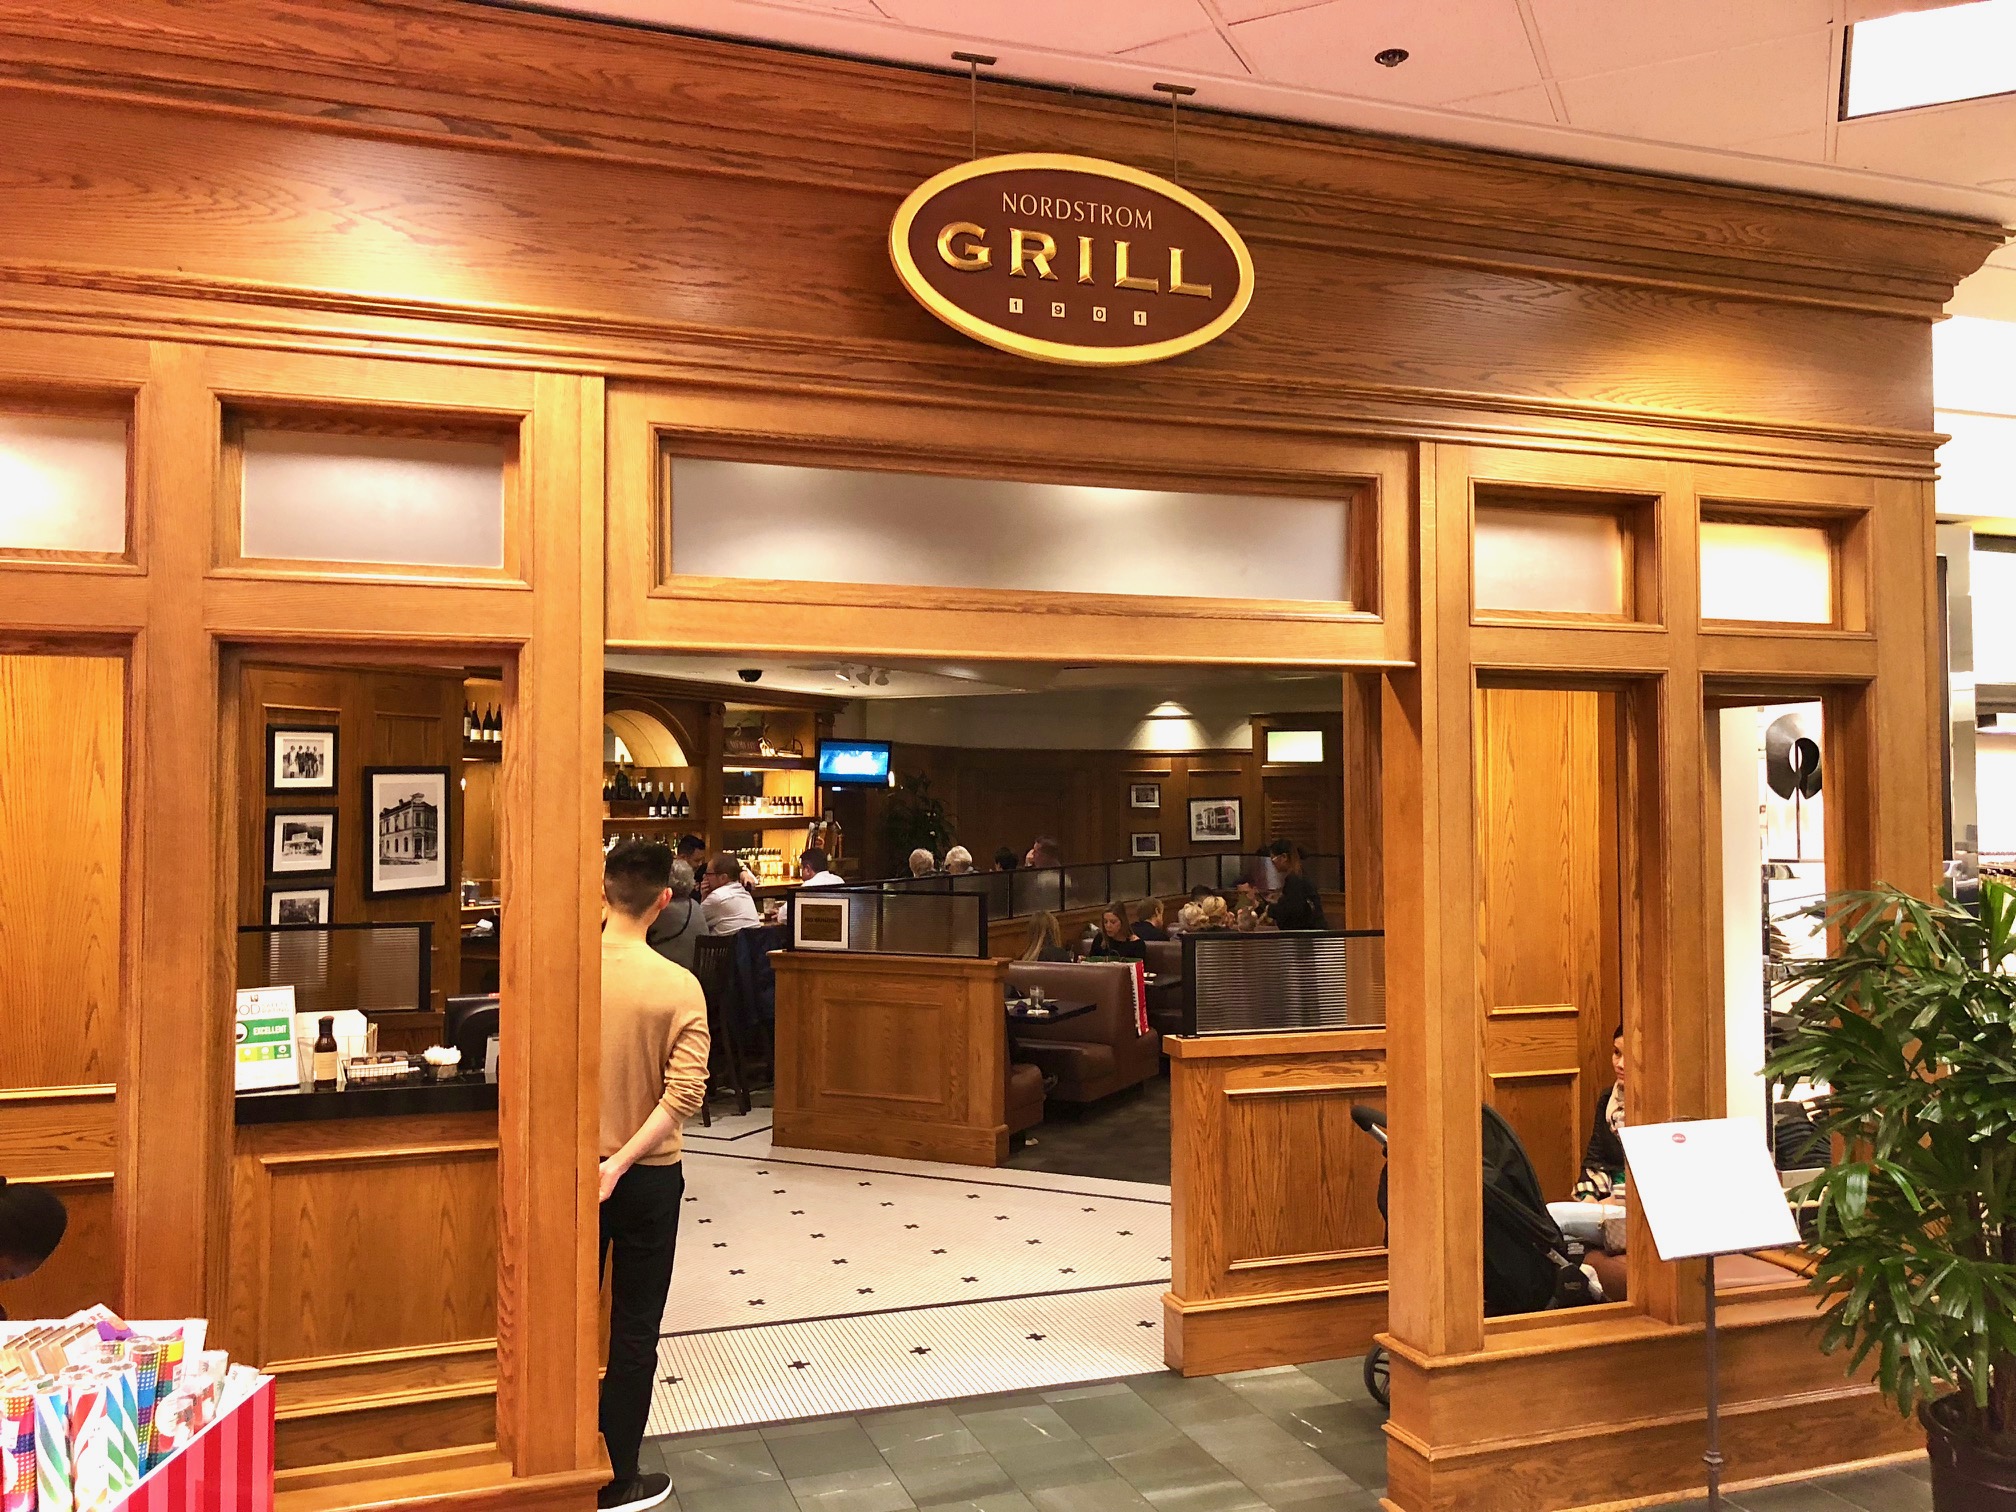 NORDSTROM GRILL, Seattle - Downtown - Restaurant Reviews, Photos &  Reservations - Tripadvisor